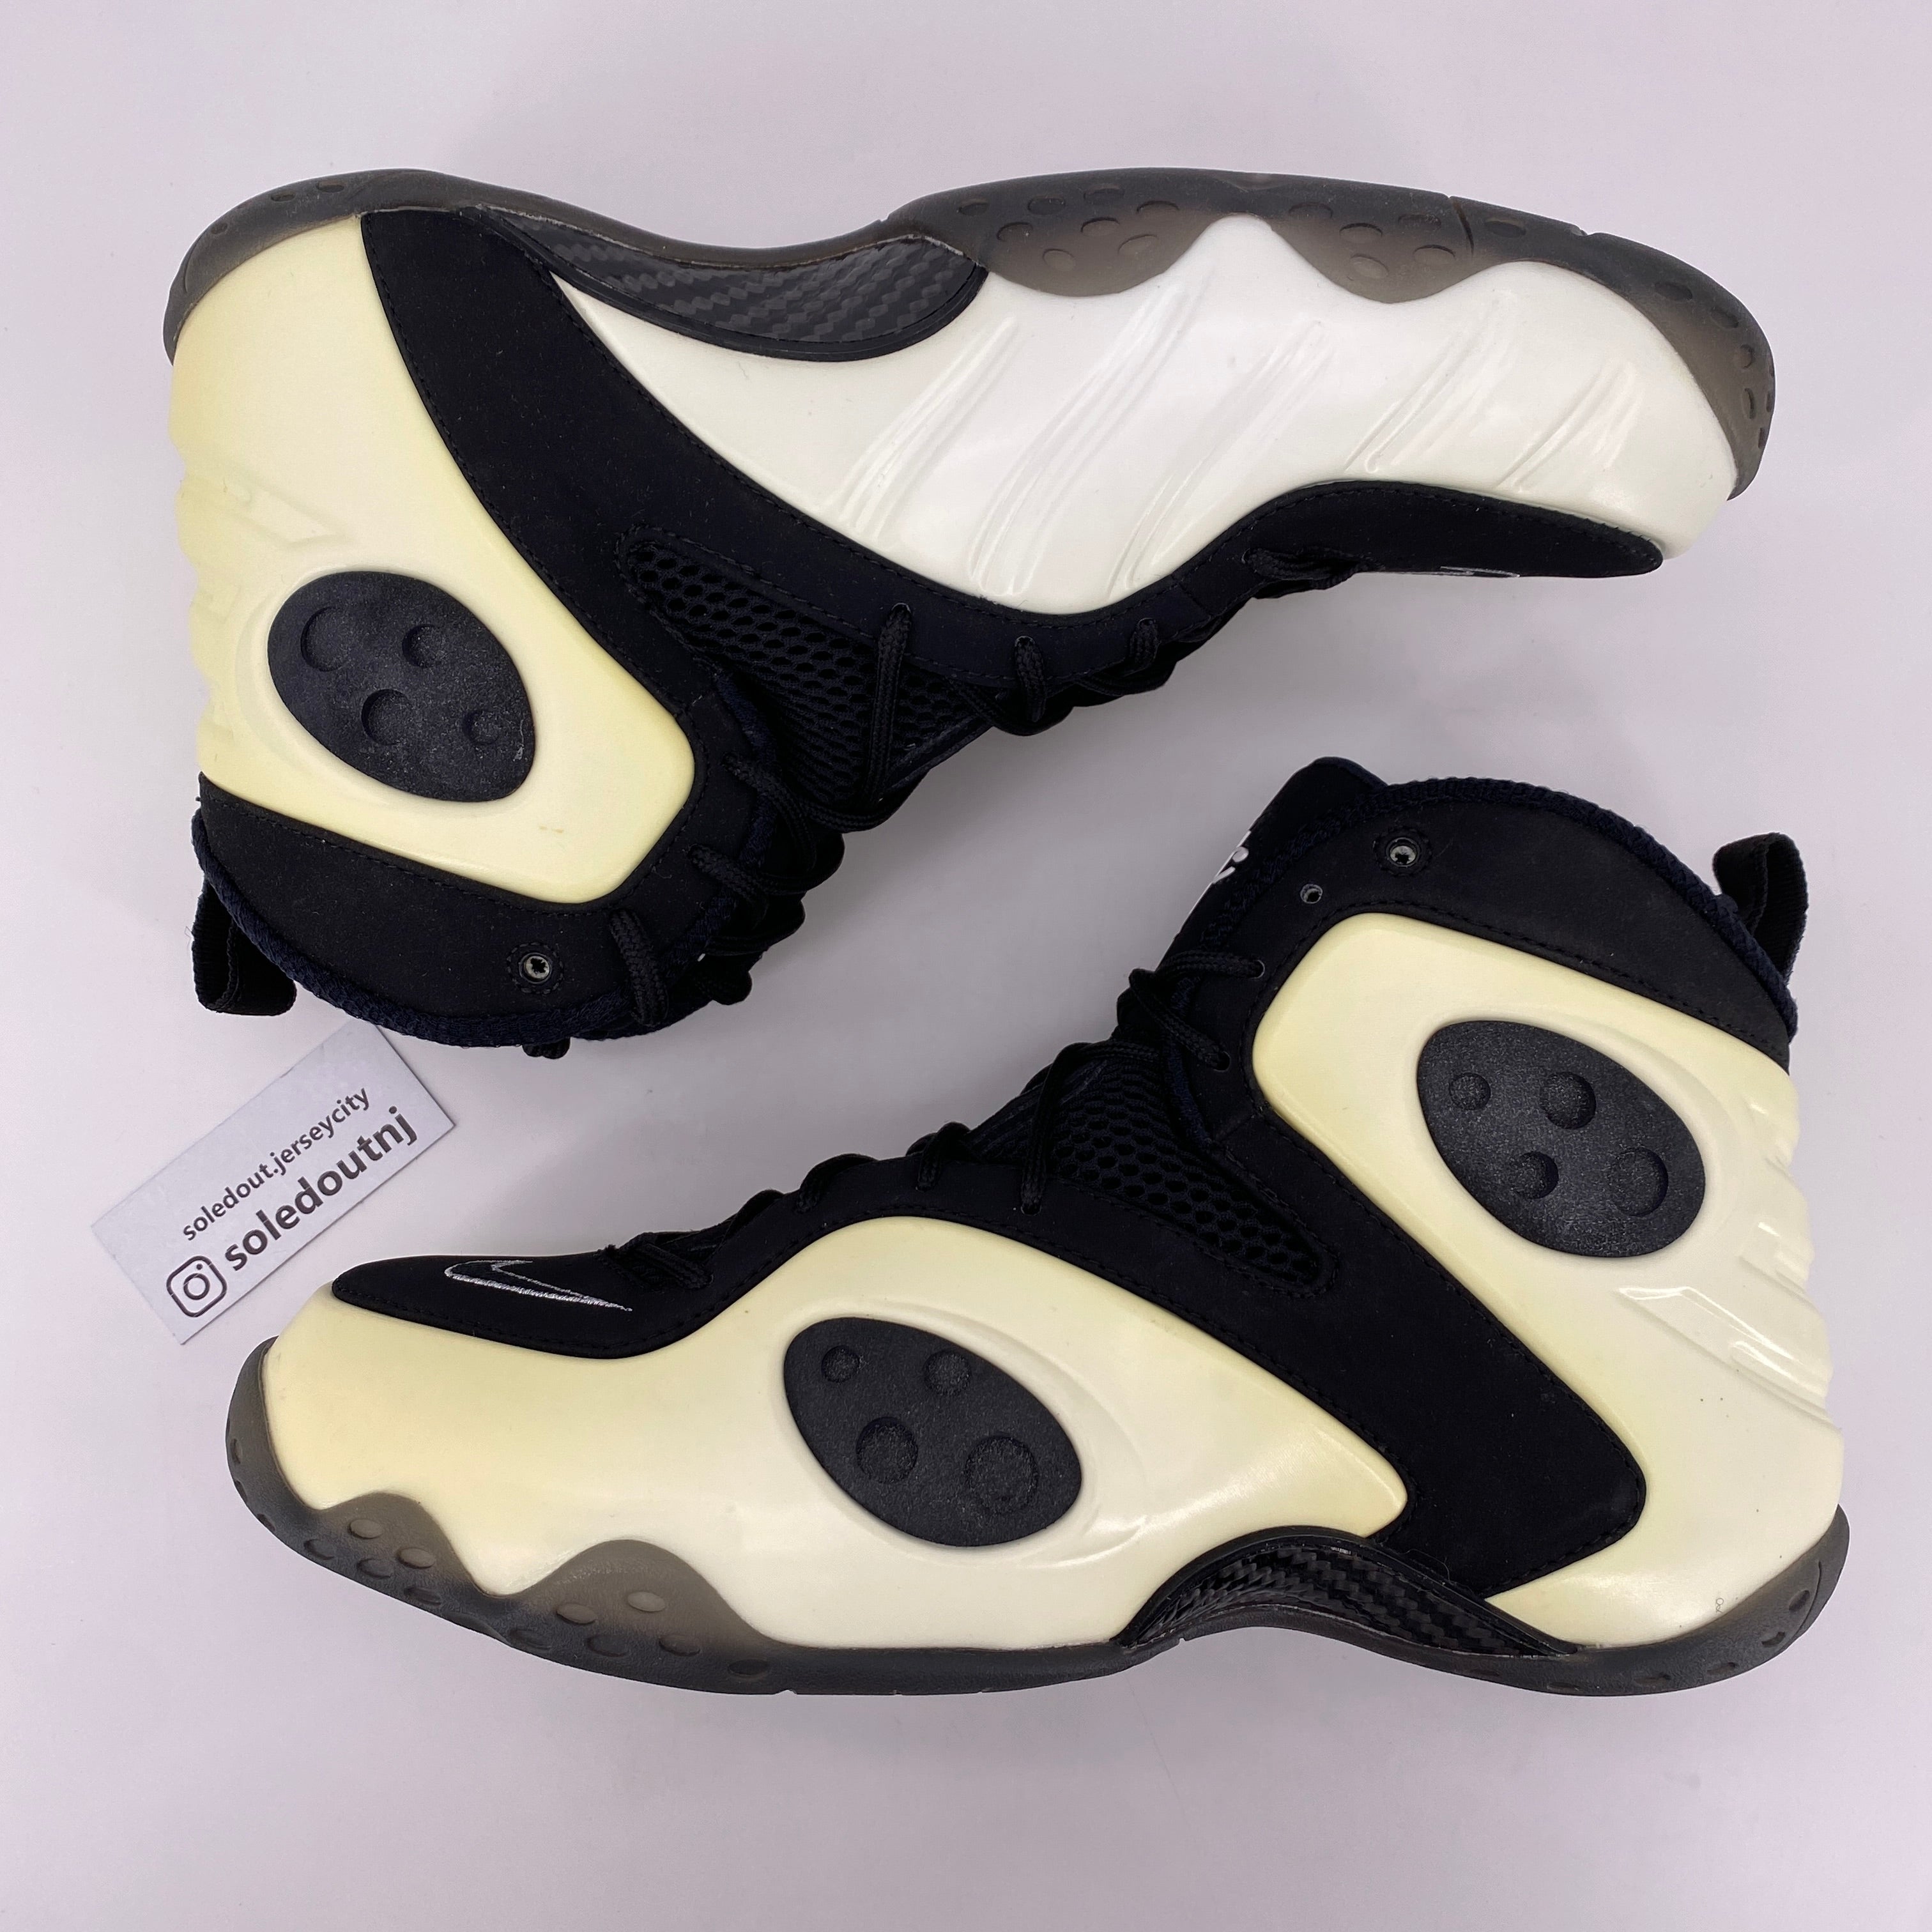 Nike Zoom Rookie &quot;Glow In The Dark&quot; 2011 New Size 10